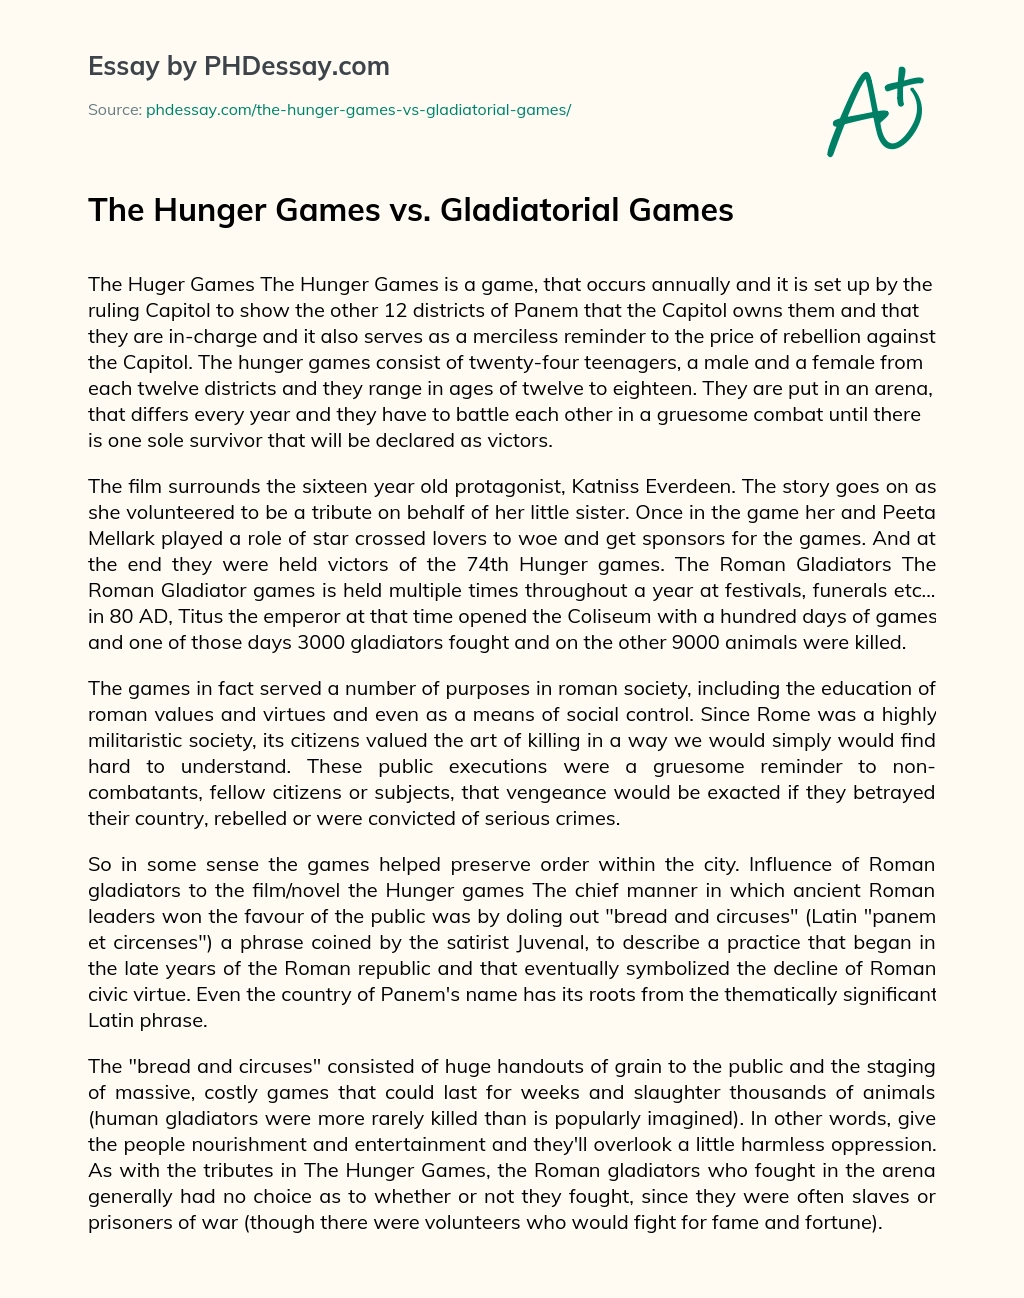 The Hunger Games vs. Gladiatorial Games essay